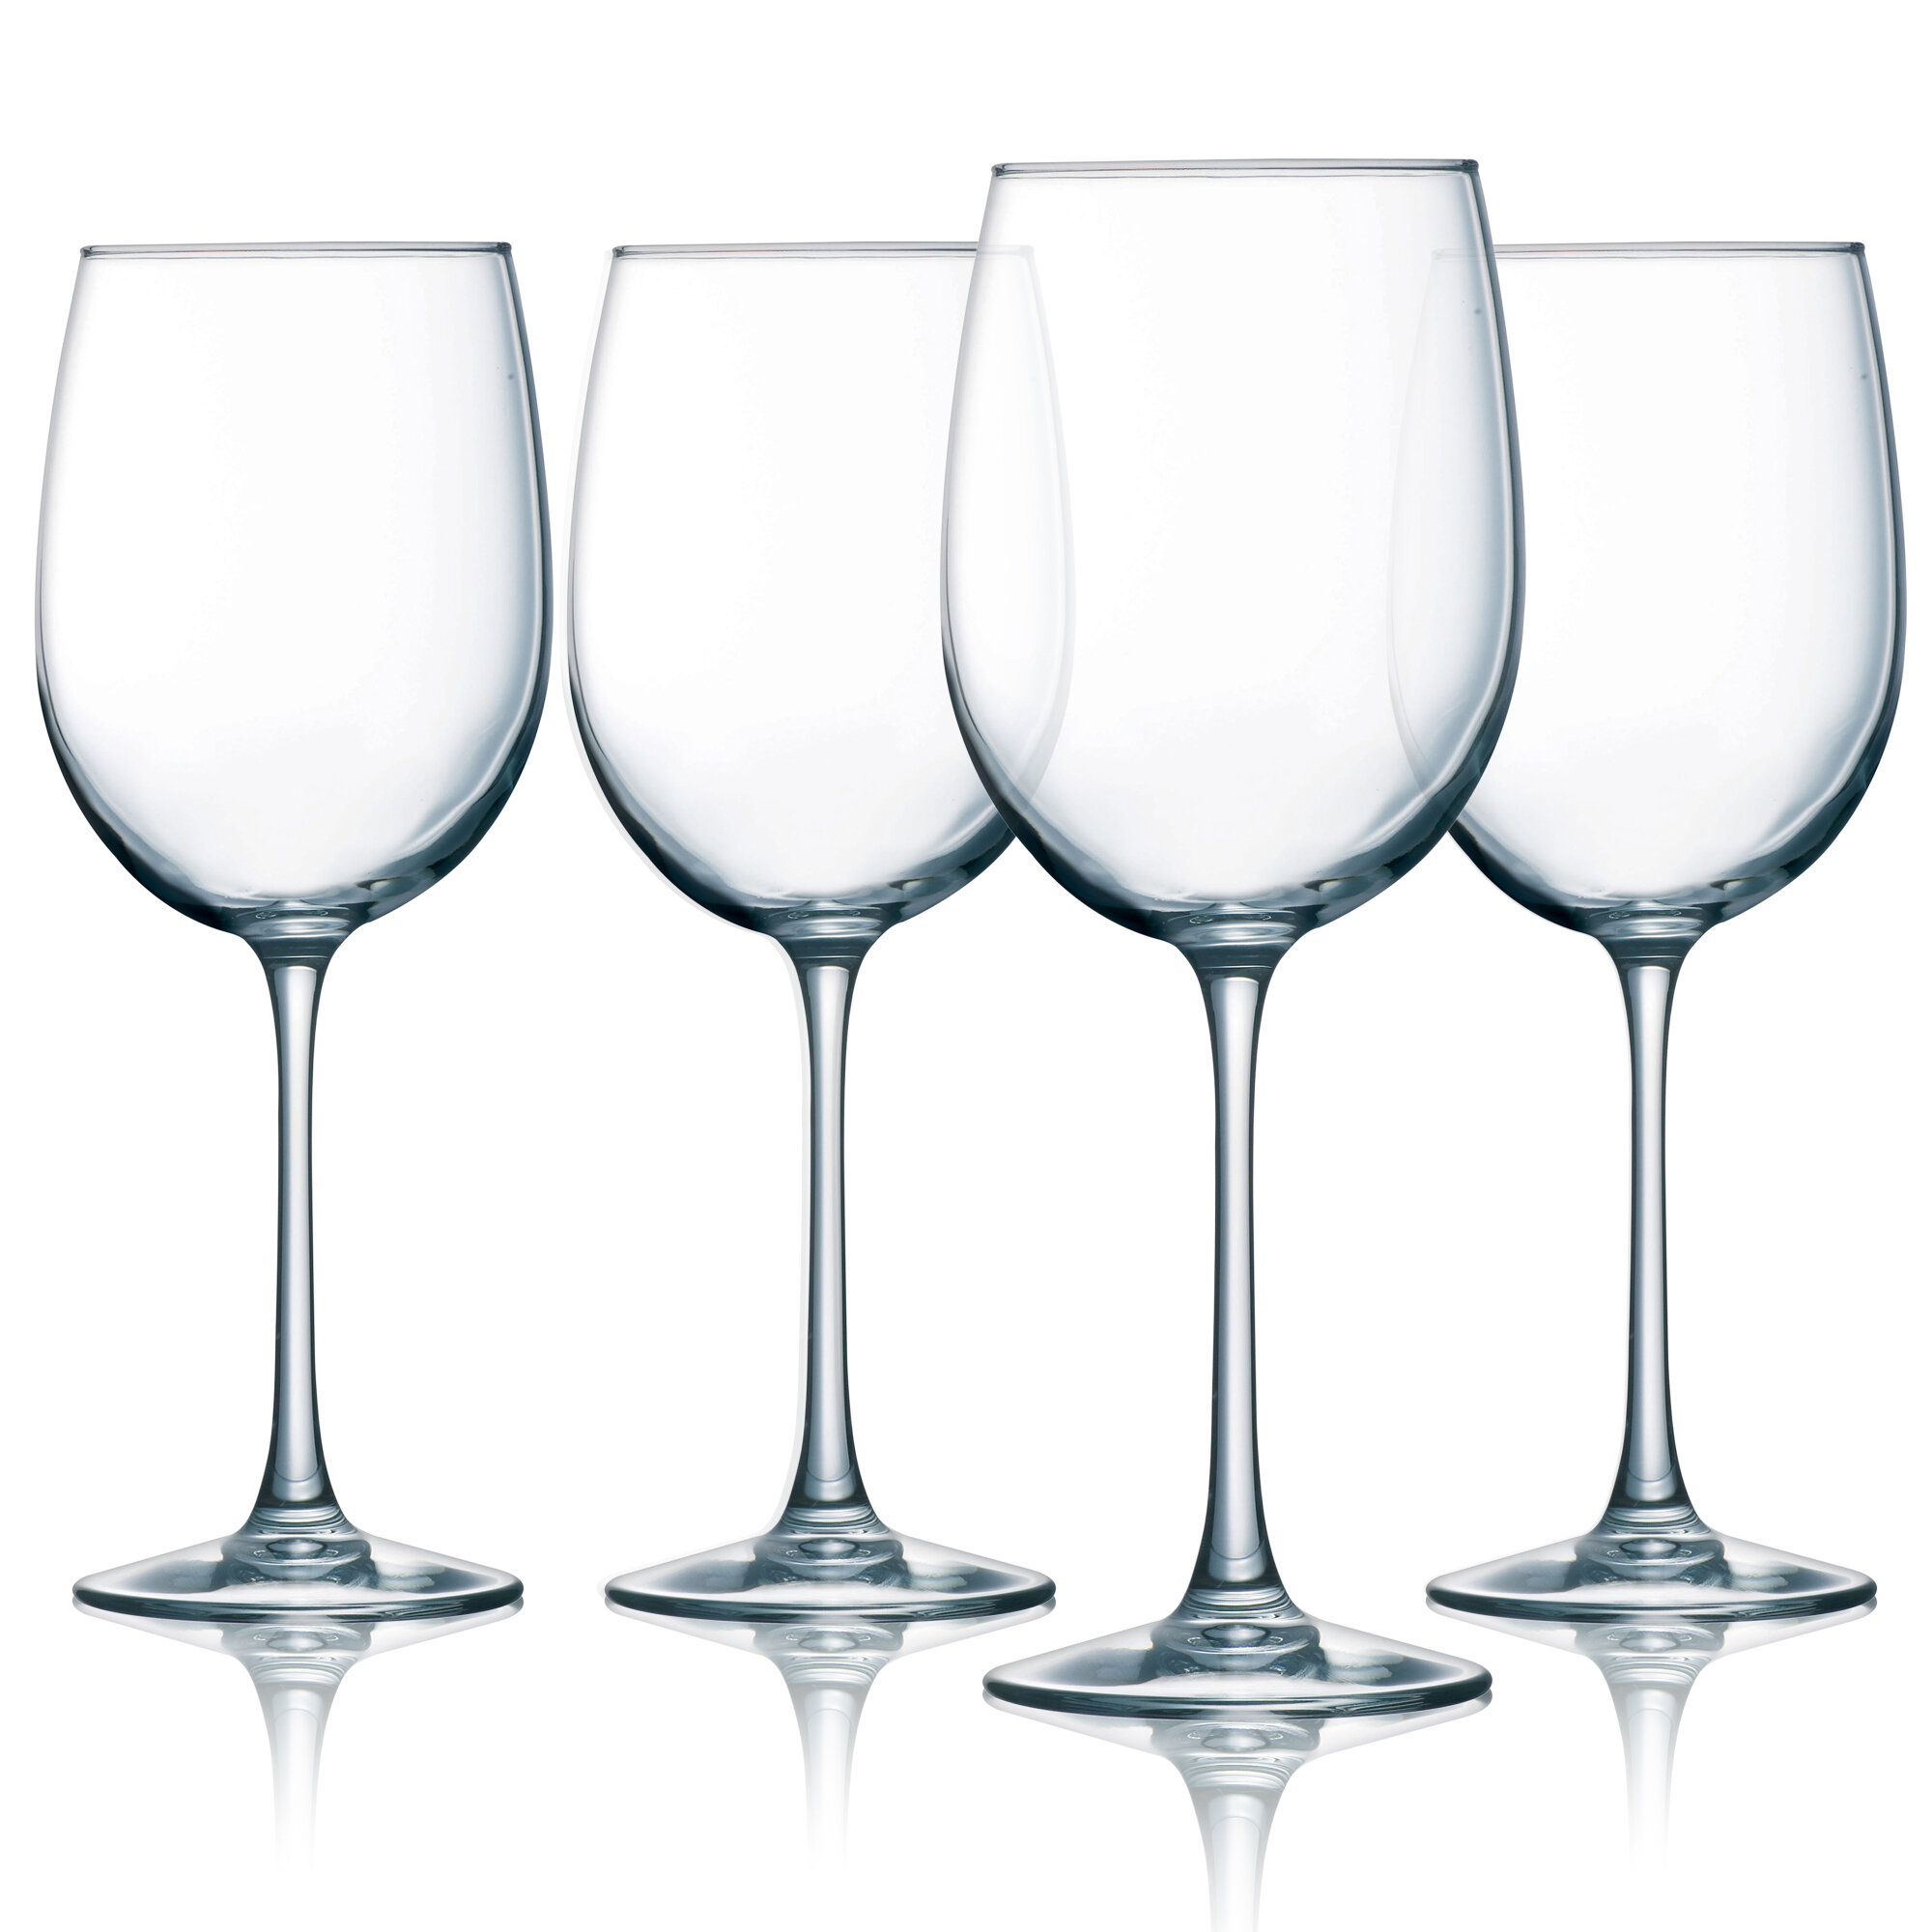 FREE SHIPPING!!! Stainless Steel Wine Glass Set of 2-18 oz 18/8 